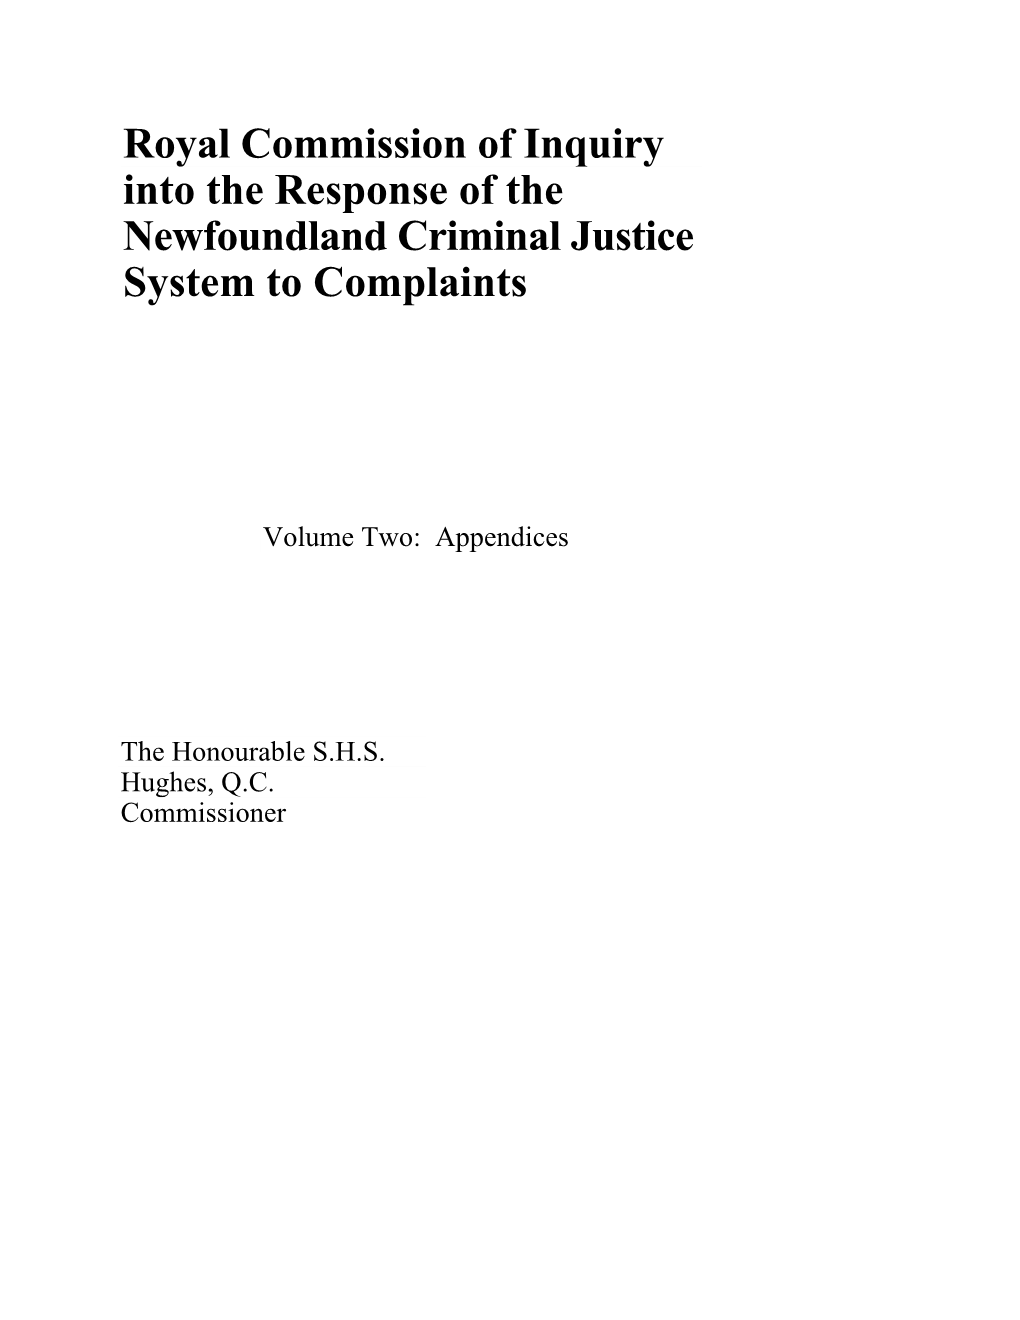 Royal Commission of Inquiry Into the Response of the Newfoundland Criminal Justice